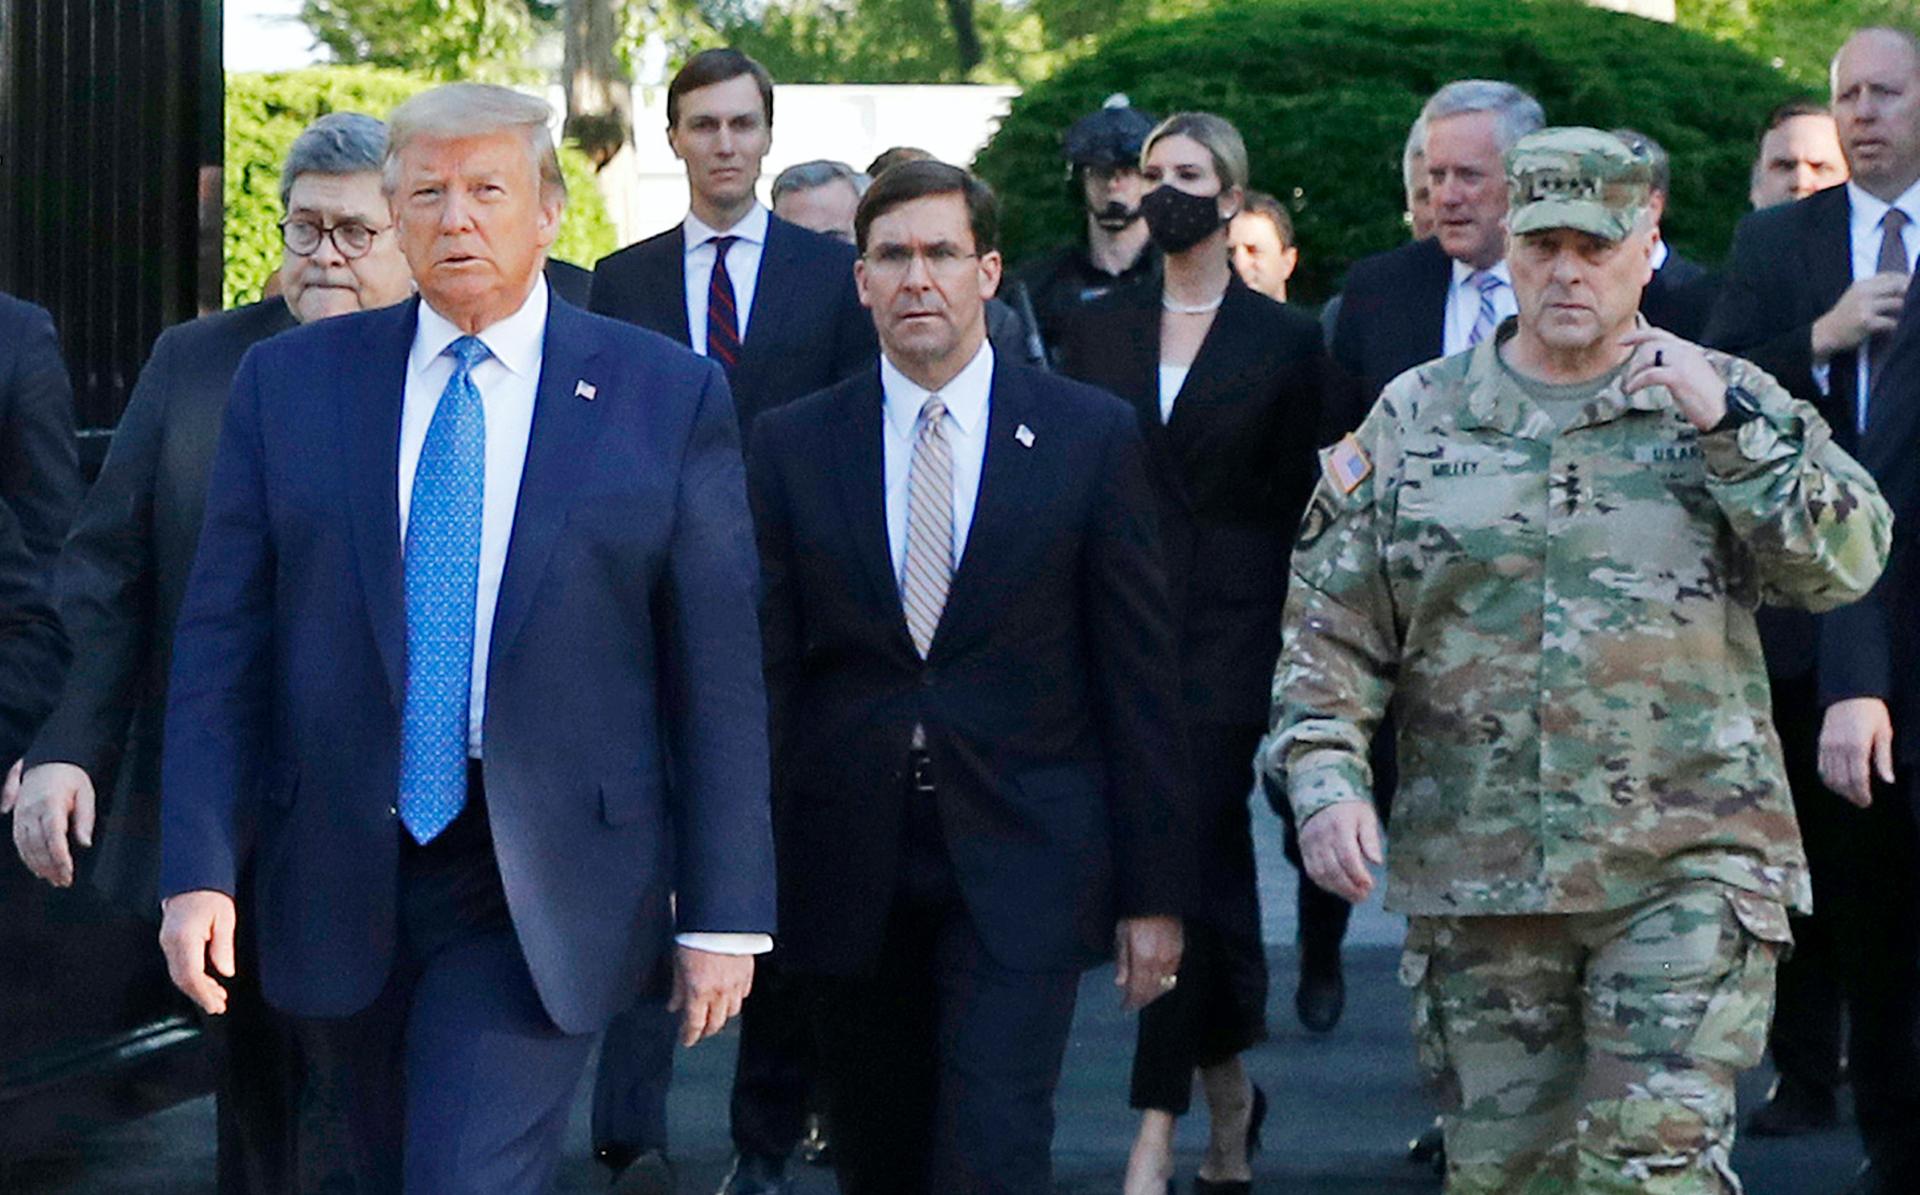 In this June 1 file photo, President Donald Trump departs the White House to visit outside St. John's Church. Walking behind Trump, at right, is Gen. Mark Milley, chairman of the Joint Chiefs of Staff.